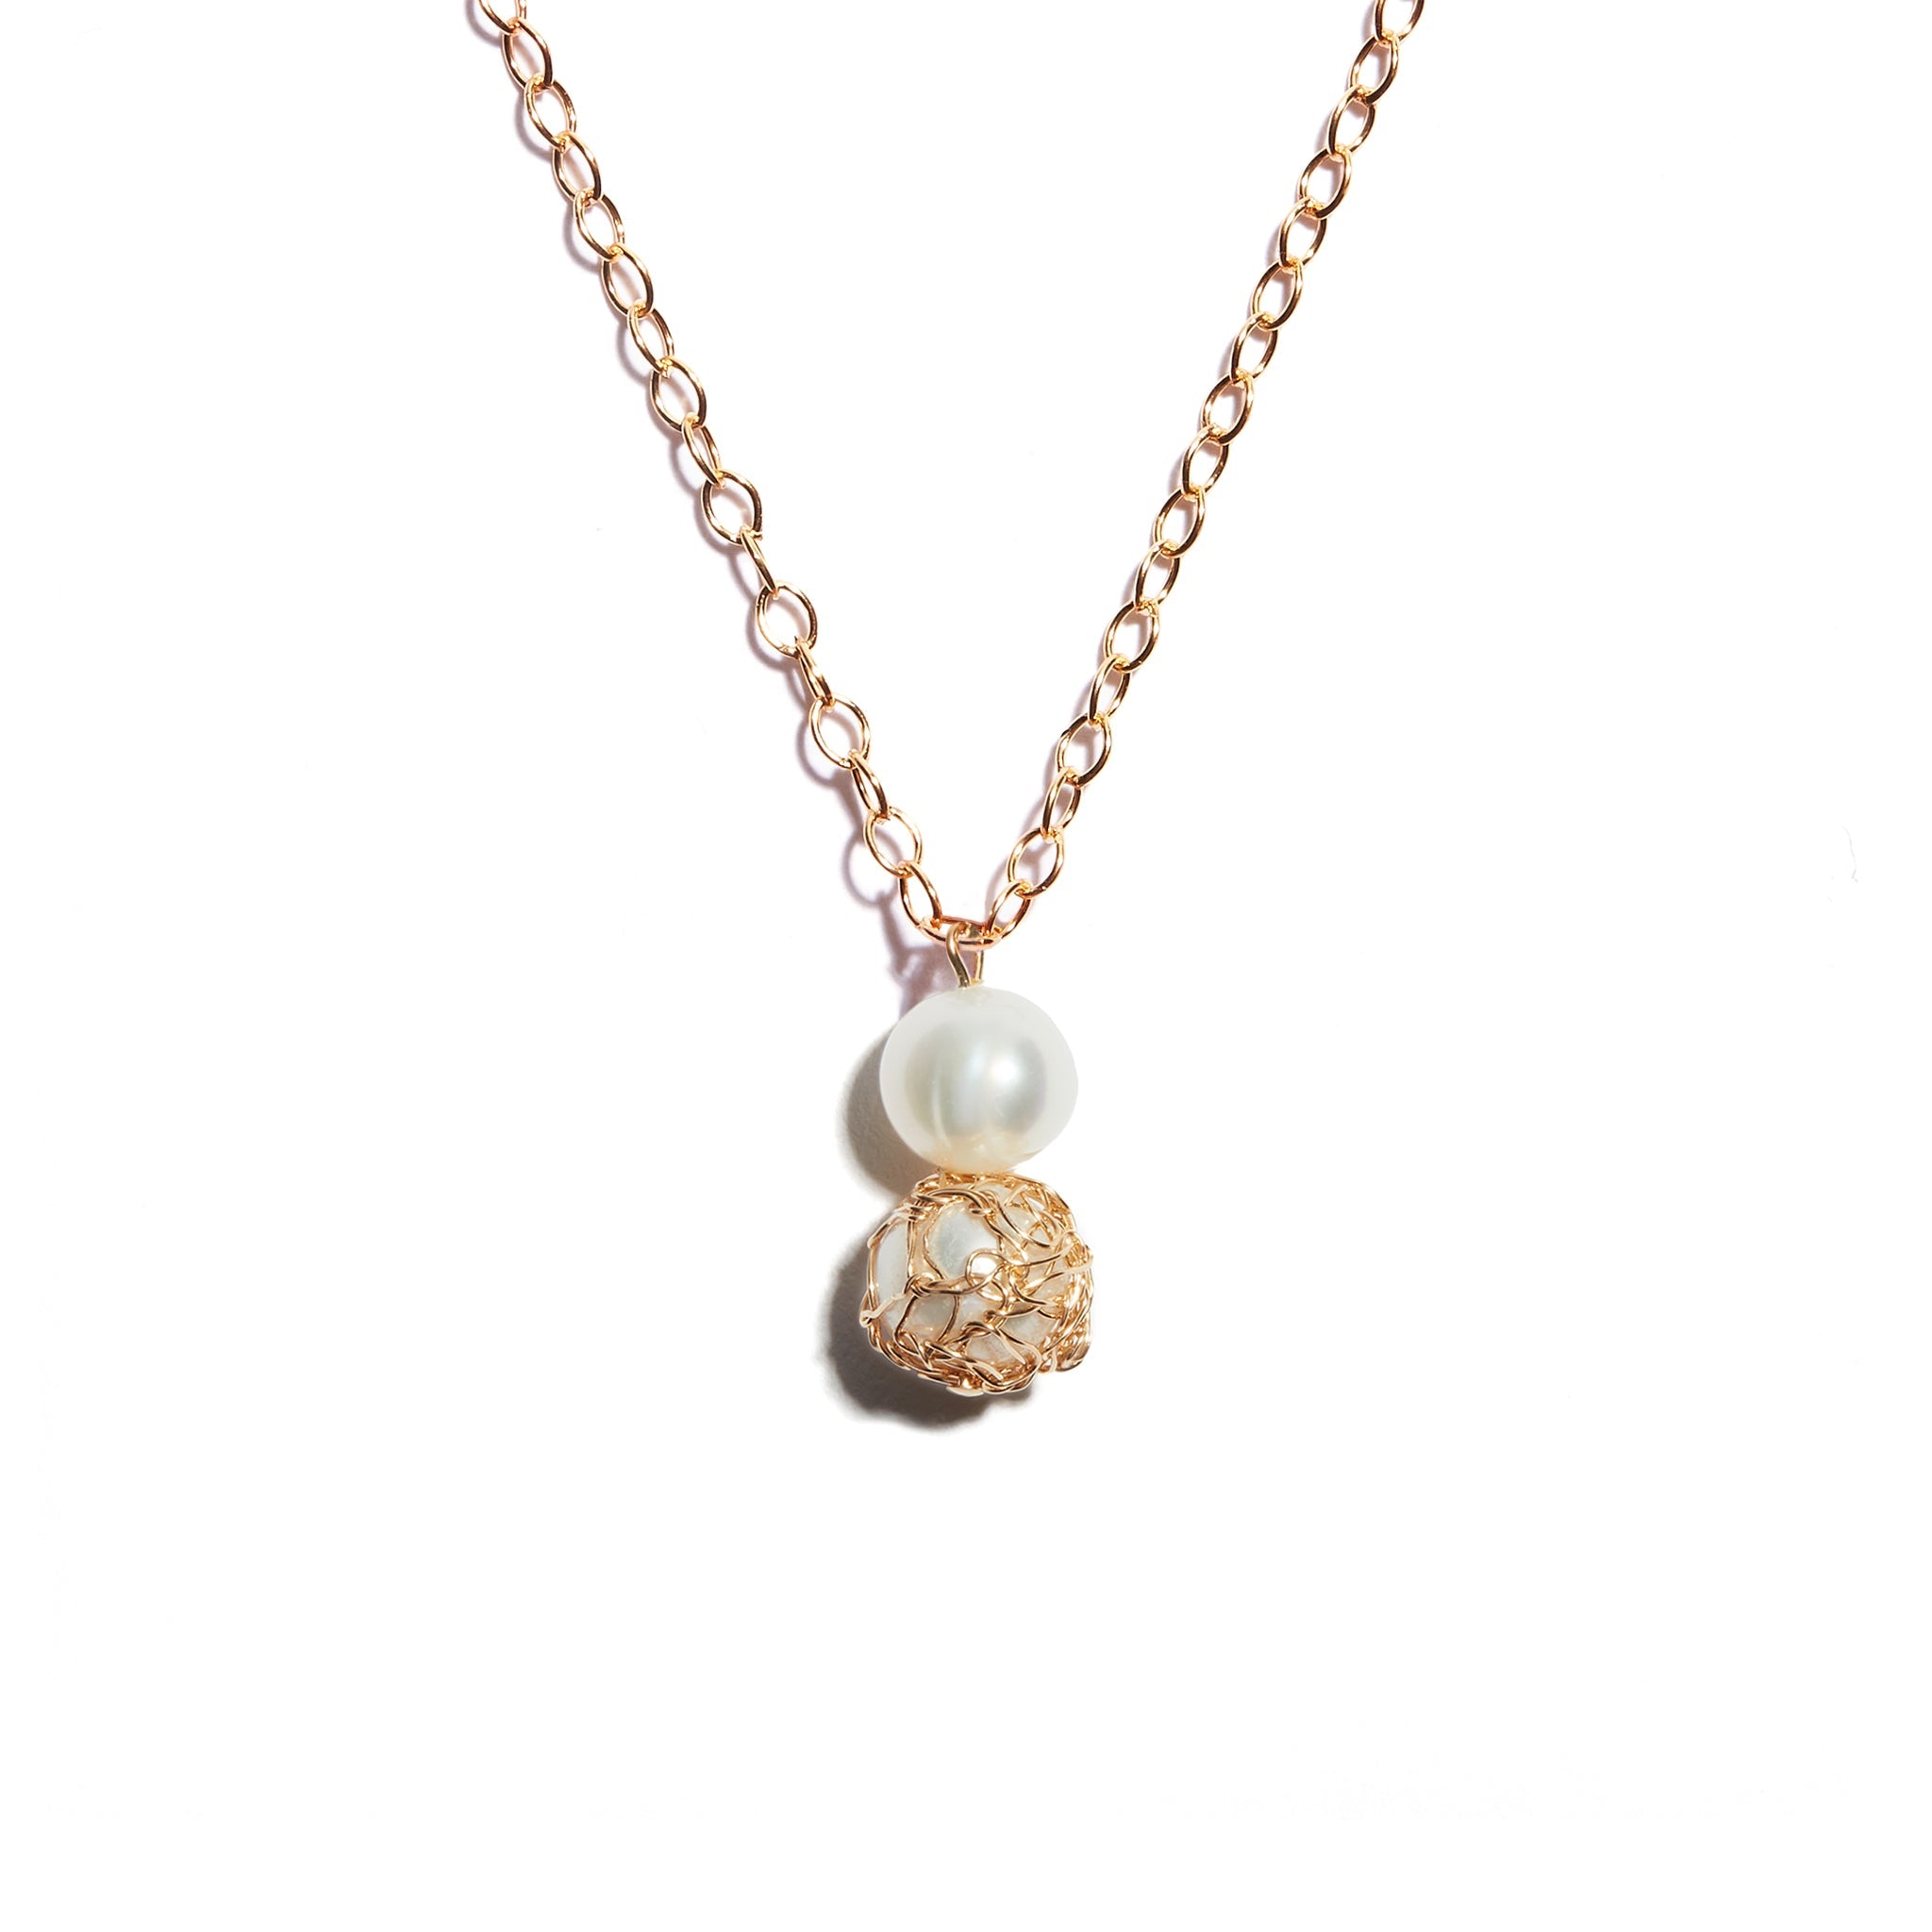 Exquisite double pearl pendant featuring crochet detailing on one pearl, crafted from high-quality sterling silver, adding sophistication and uniqueness to your ensemble.